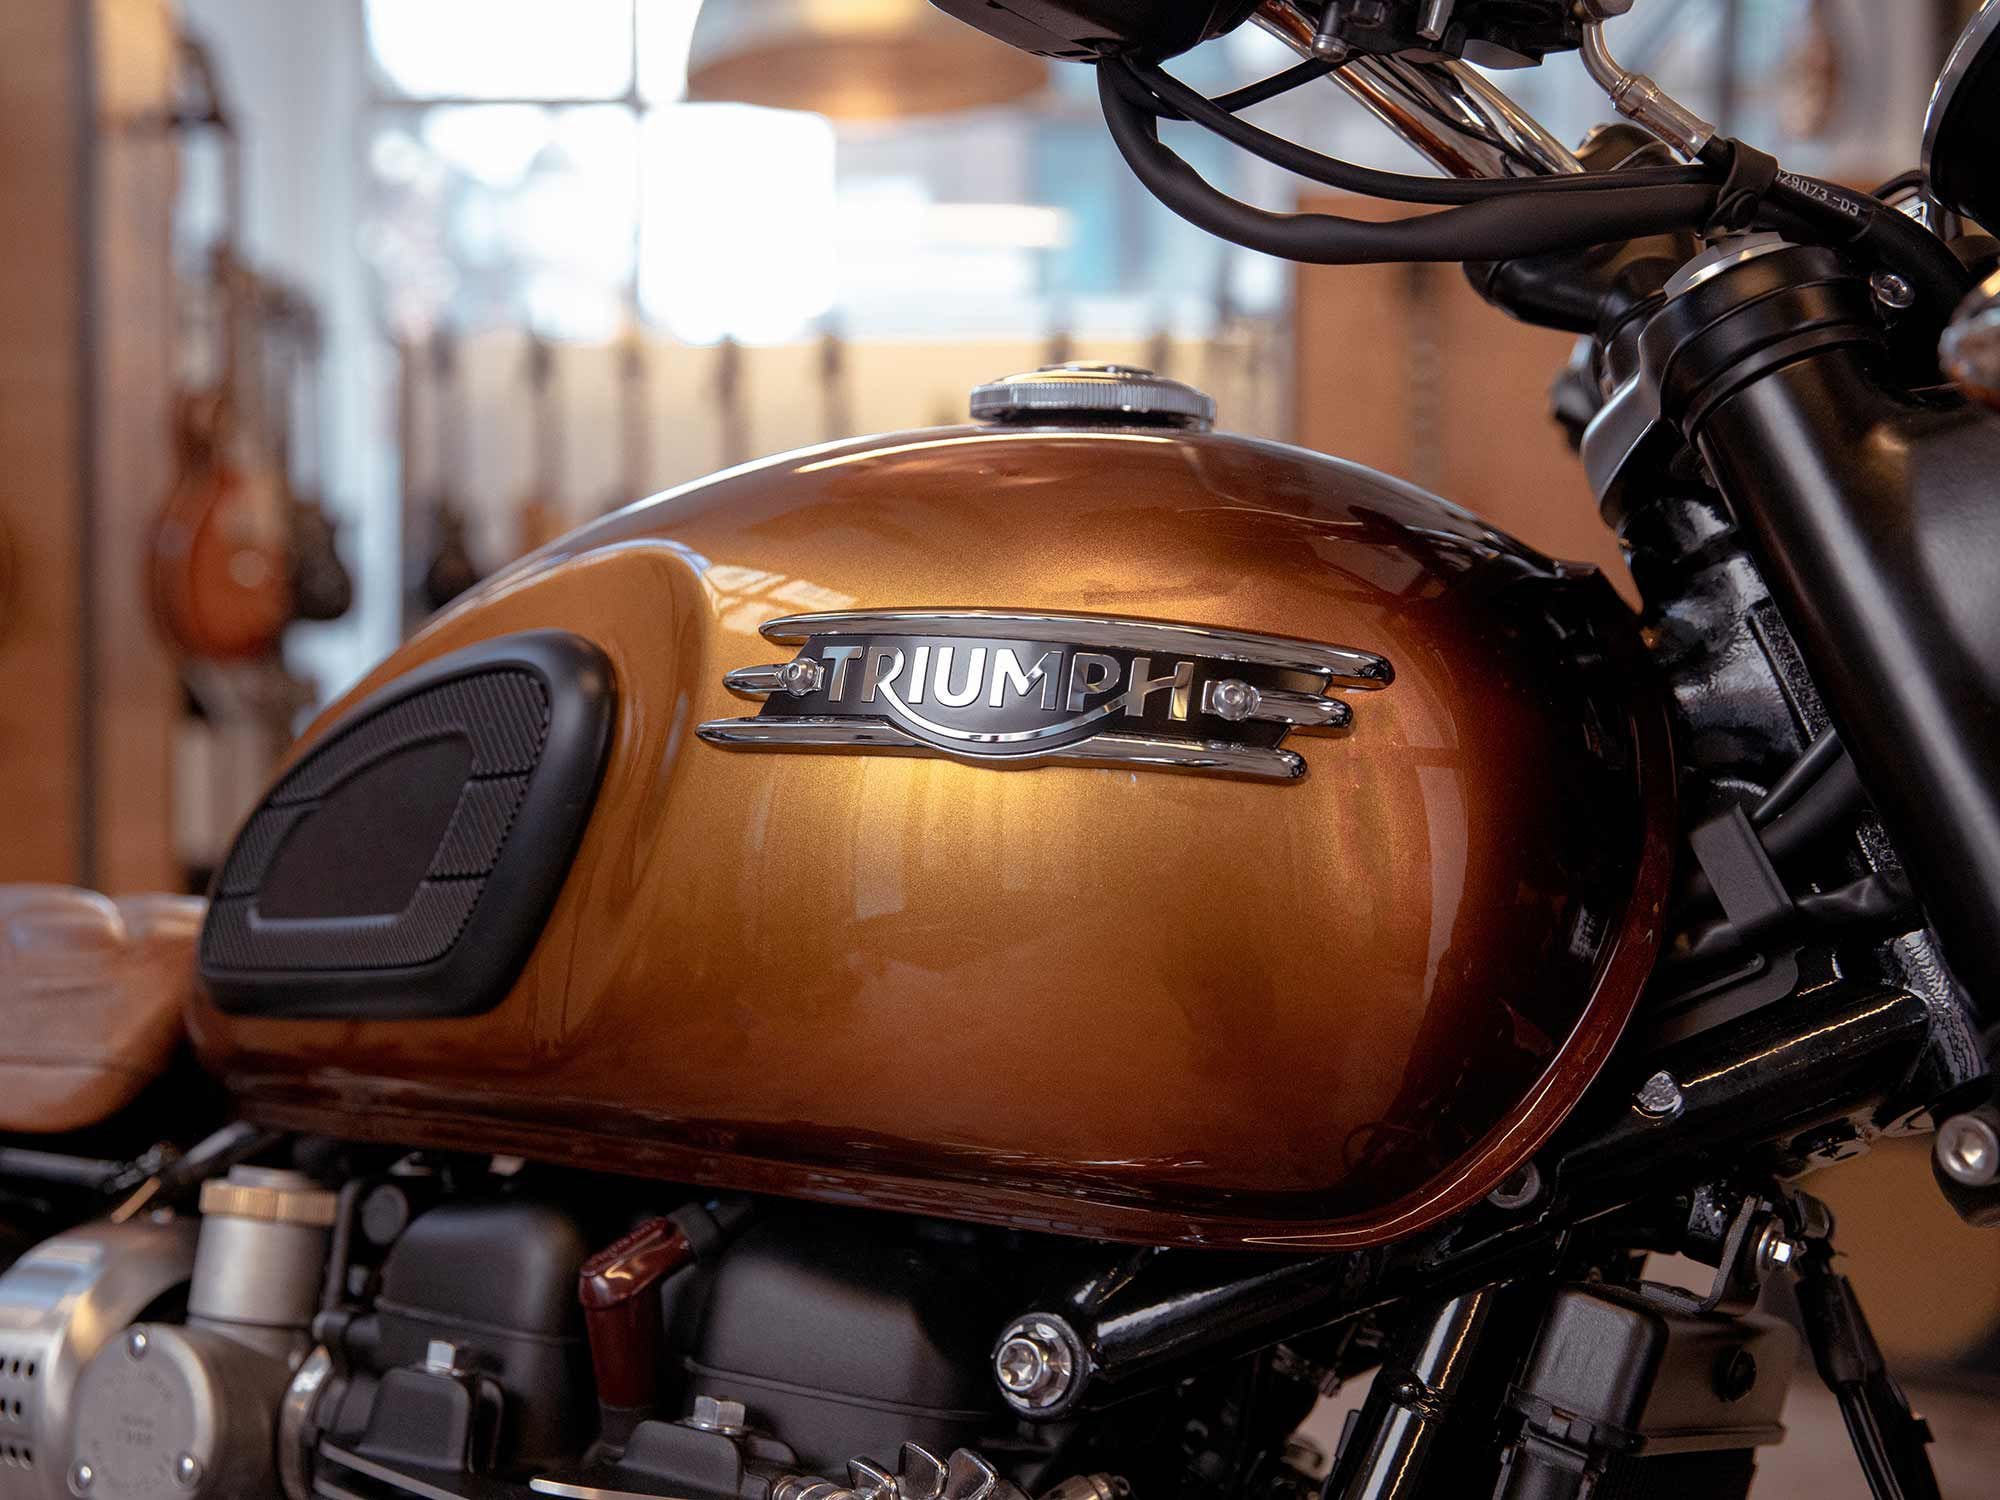 The Bonneville T120’s custom sunburst paint takes influence directly from the Les Paul.